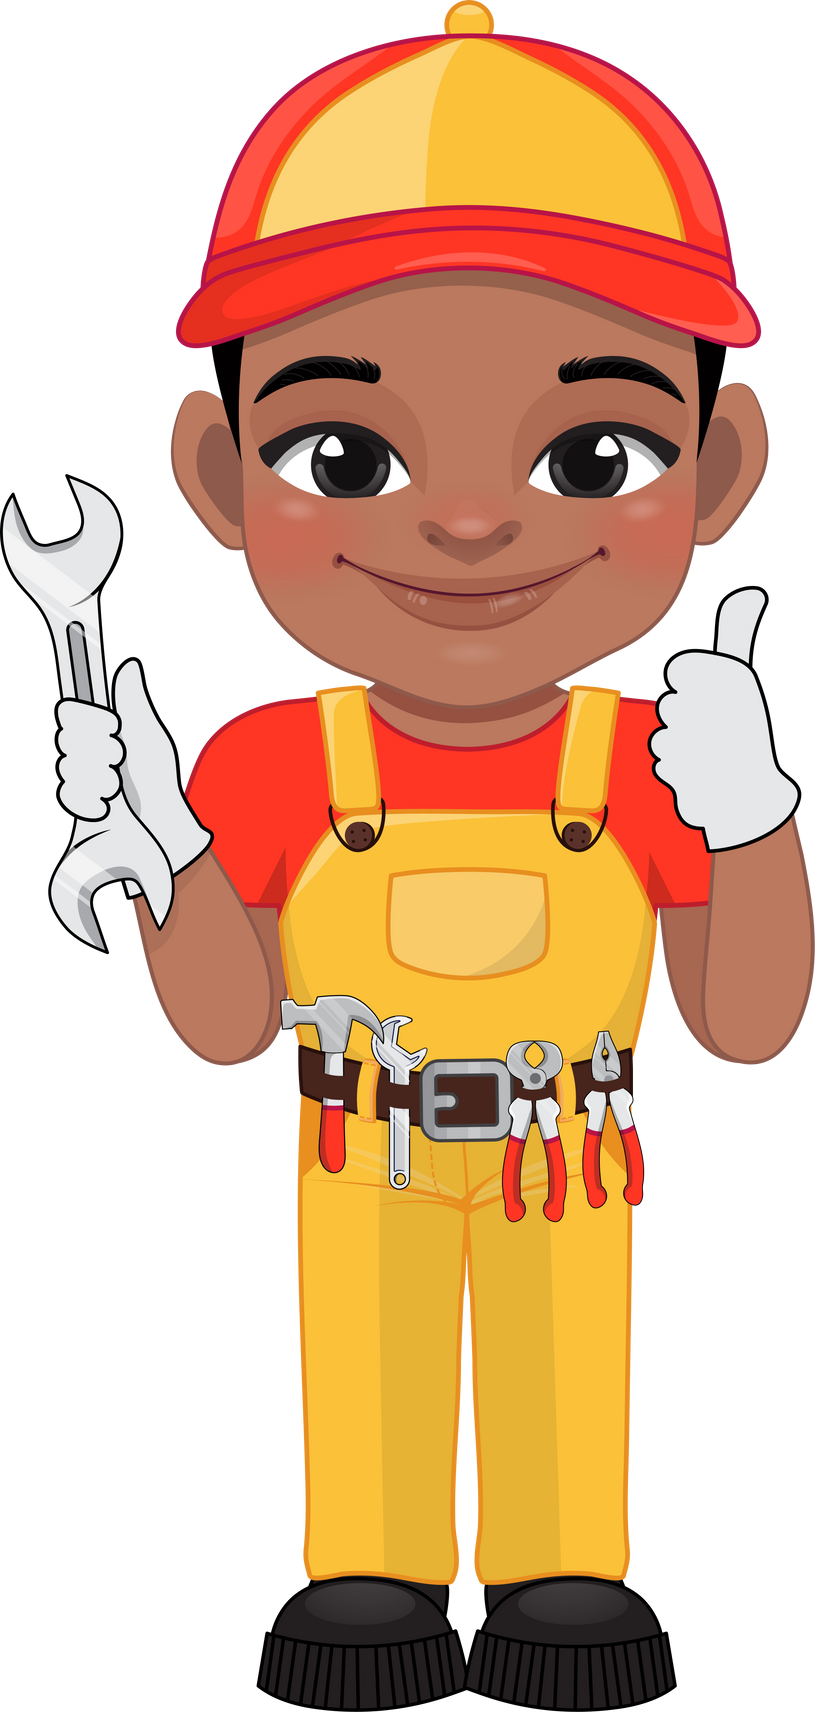 Mechanic Character with Cute American African Boy Holding Wrench Cartoon